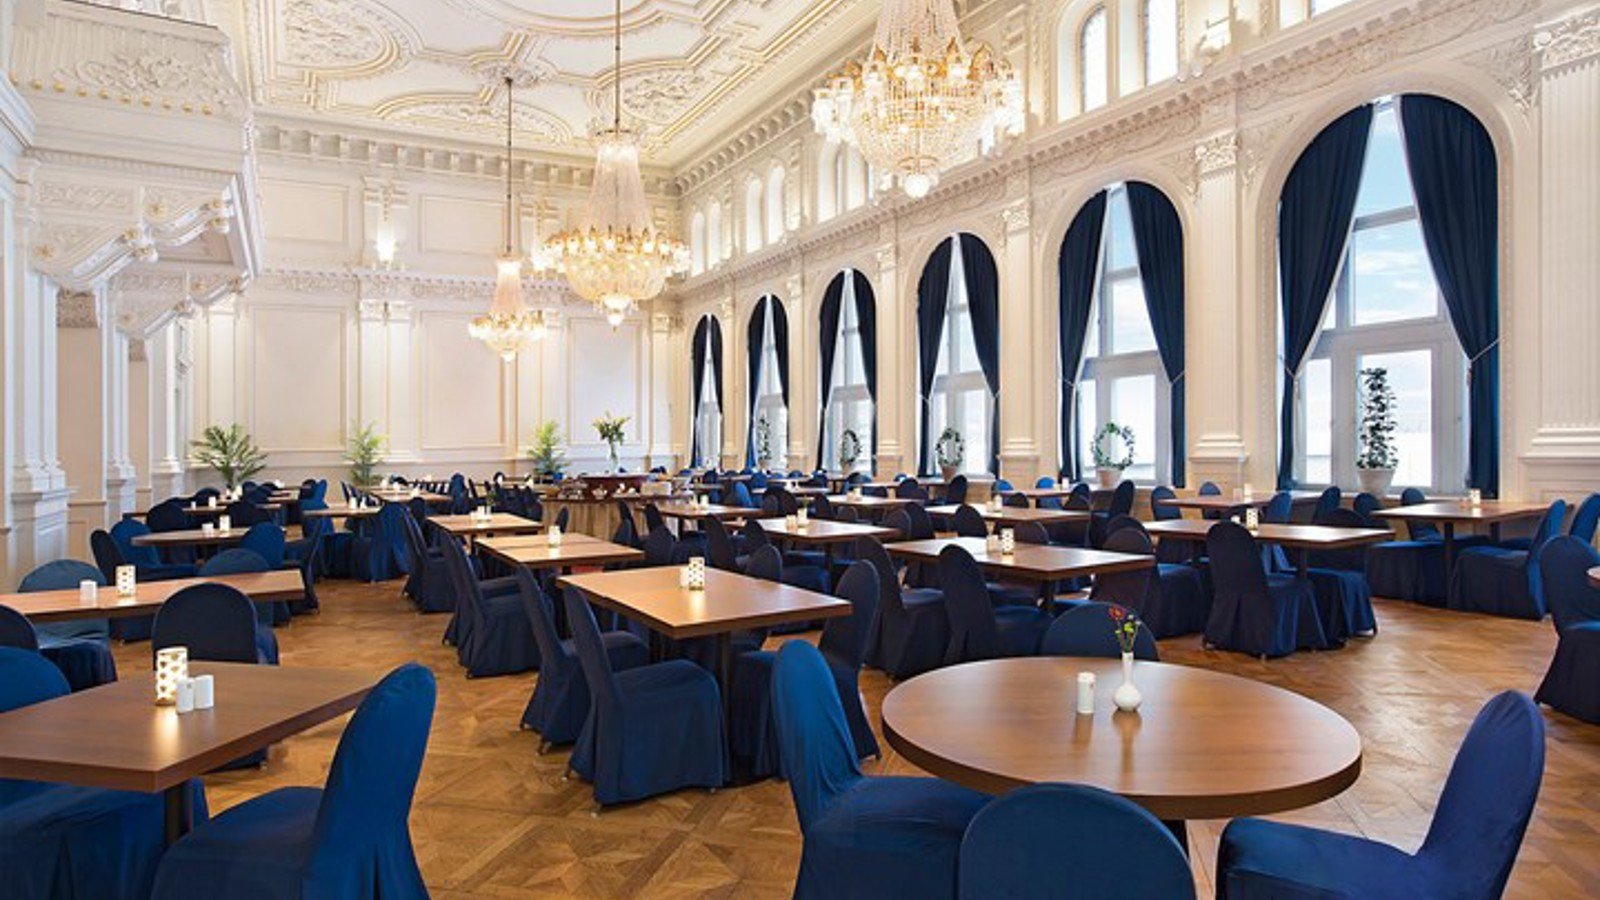 Large room with crystal chandeliers, round tables, white walls and blue details